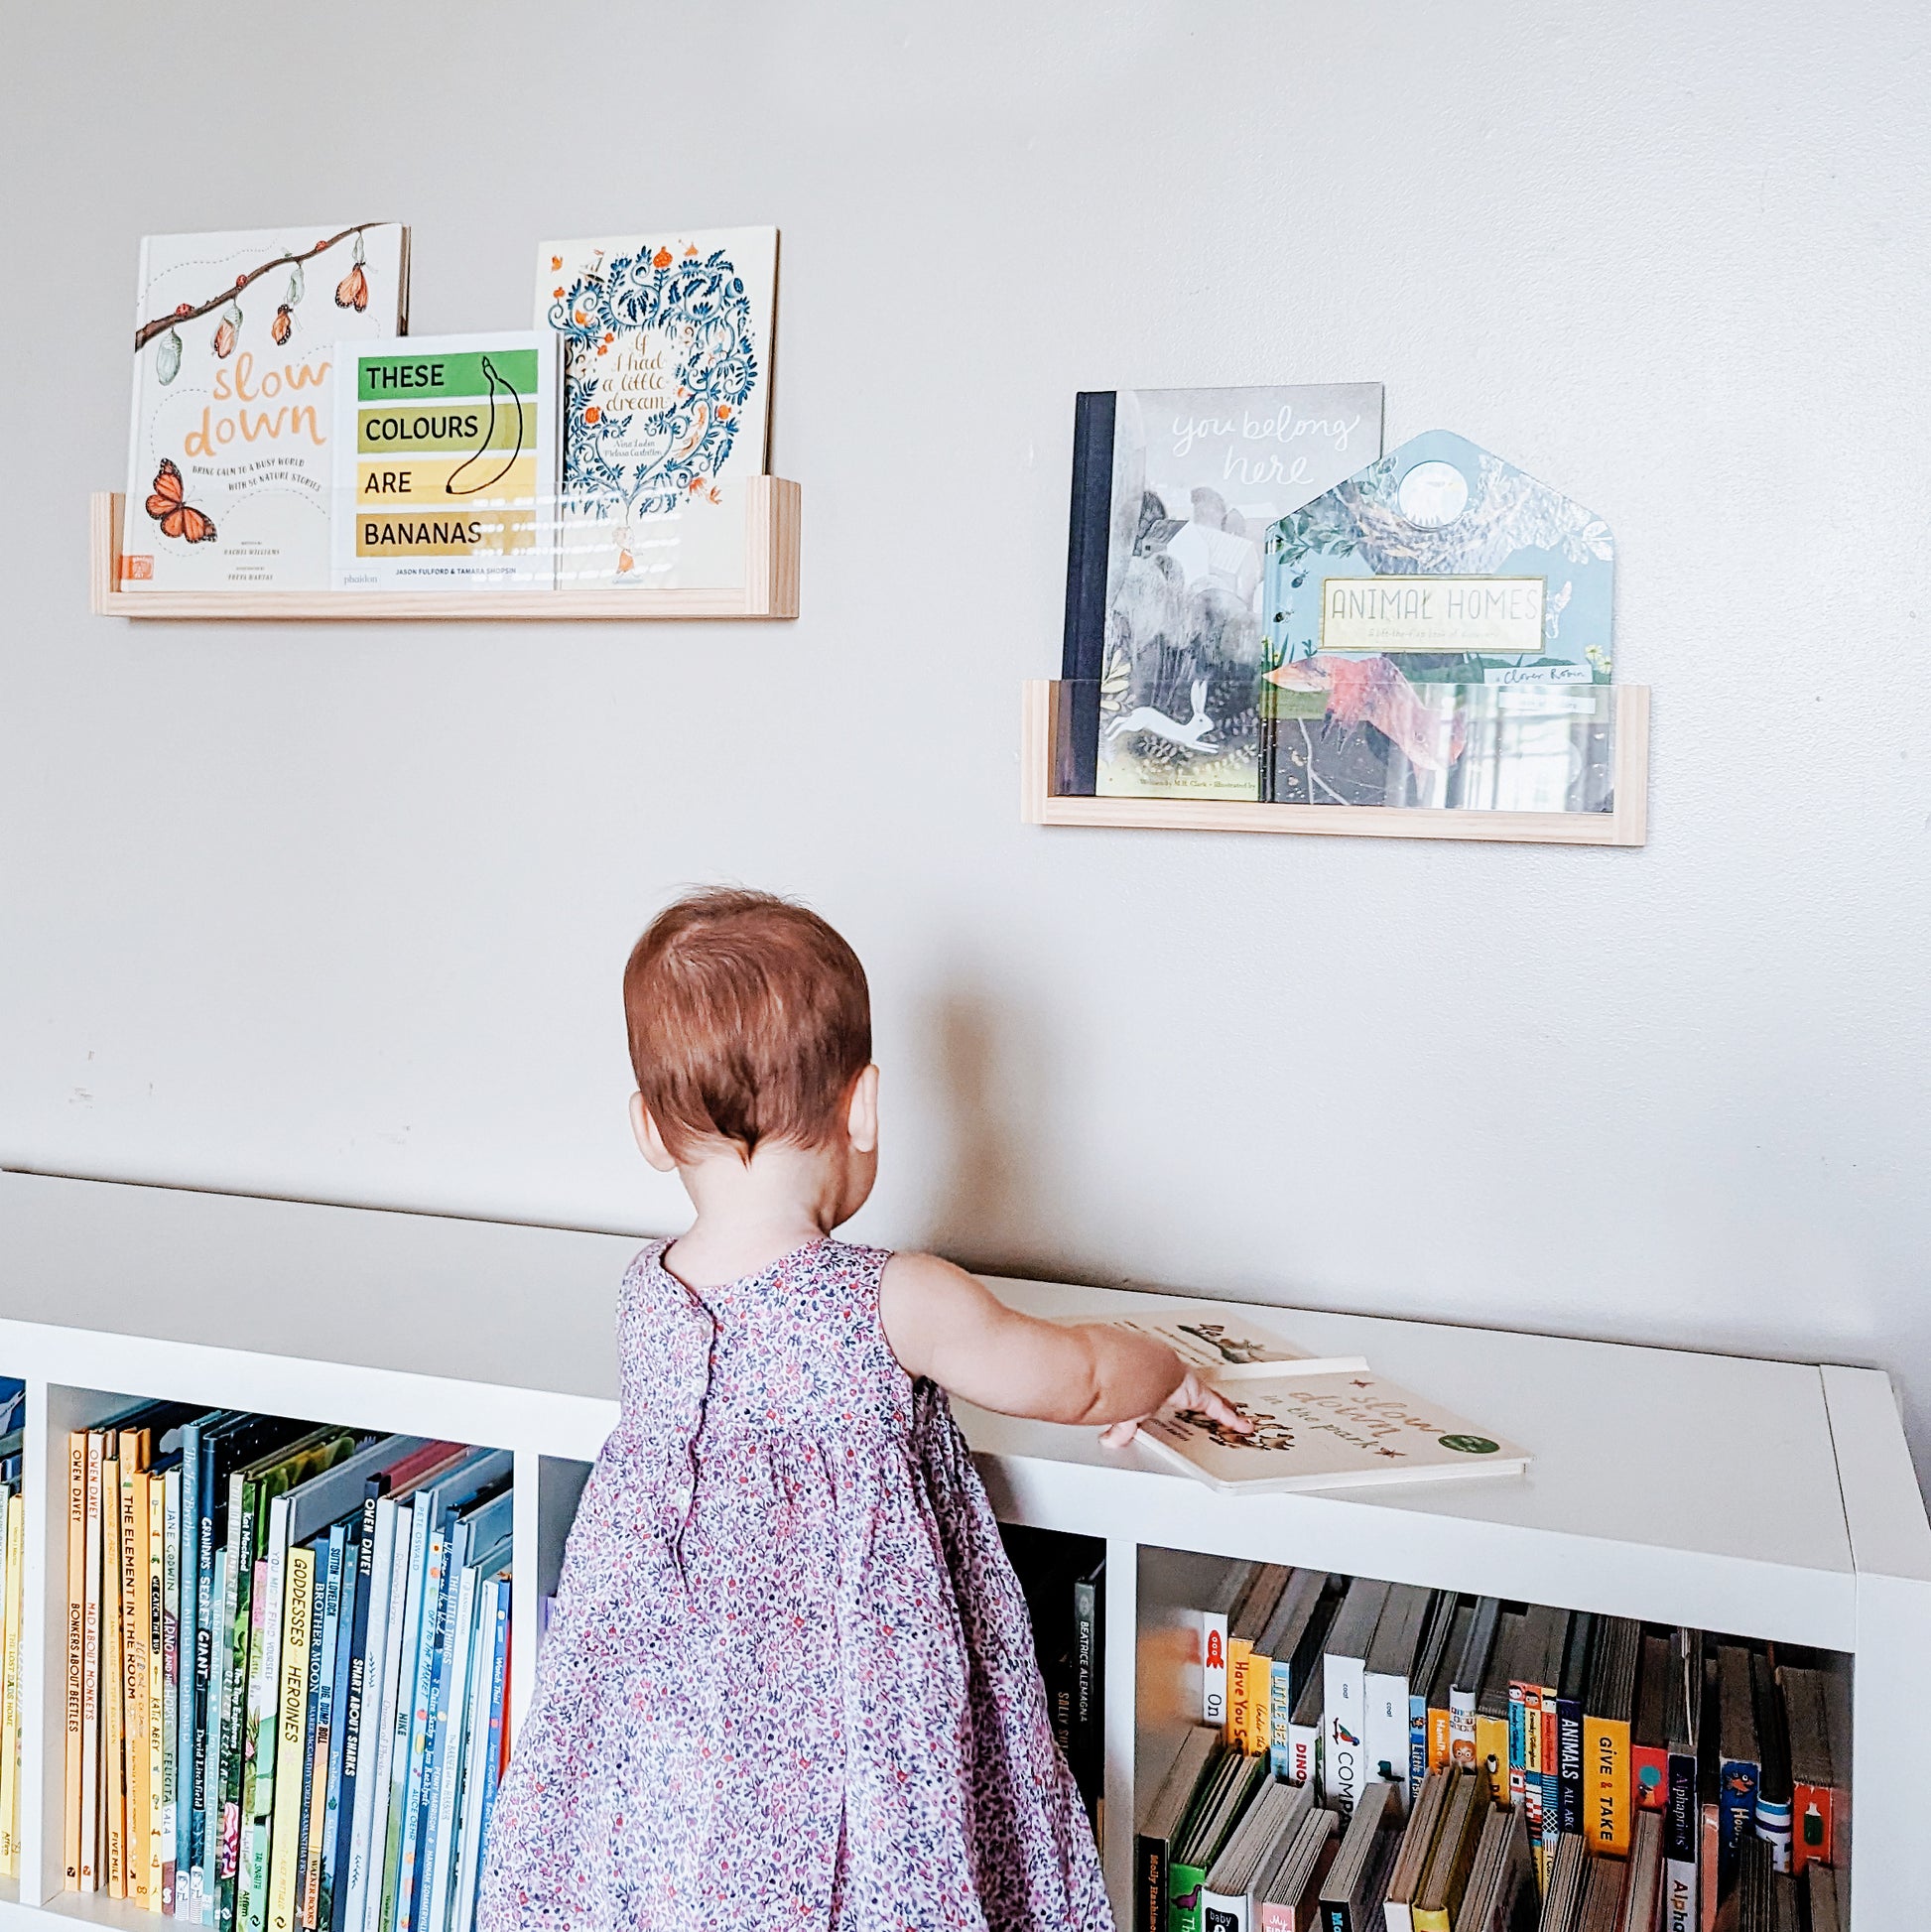 This item has a wooden shelf with clear acrylic in front. The books are stacked inside with a toddler girl looking at the books